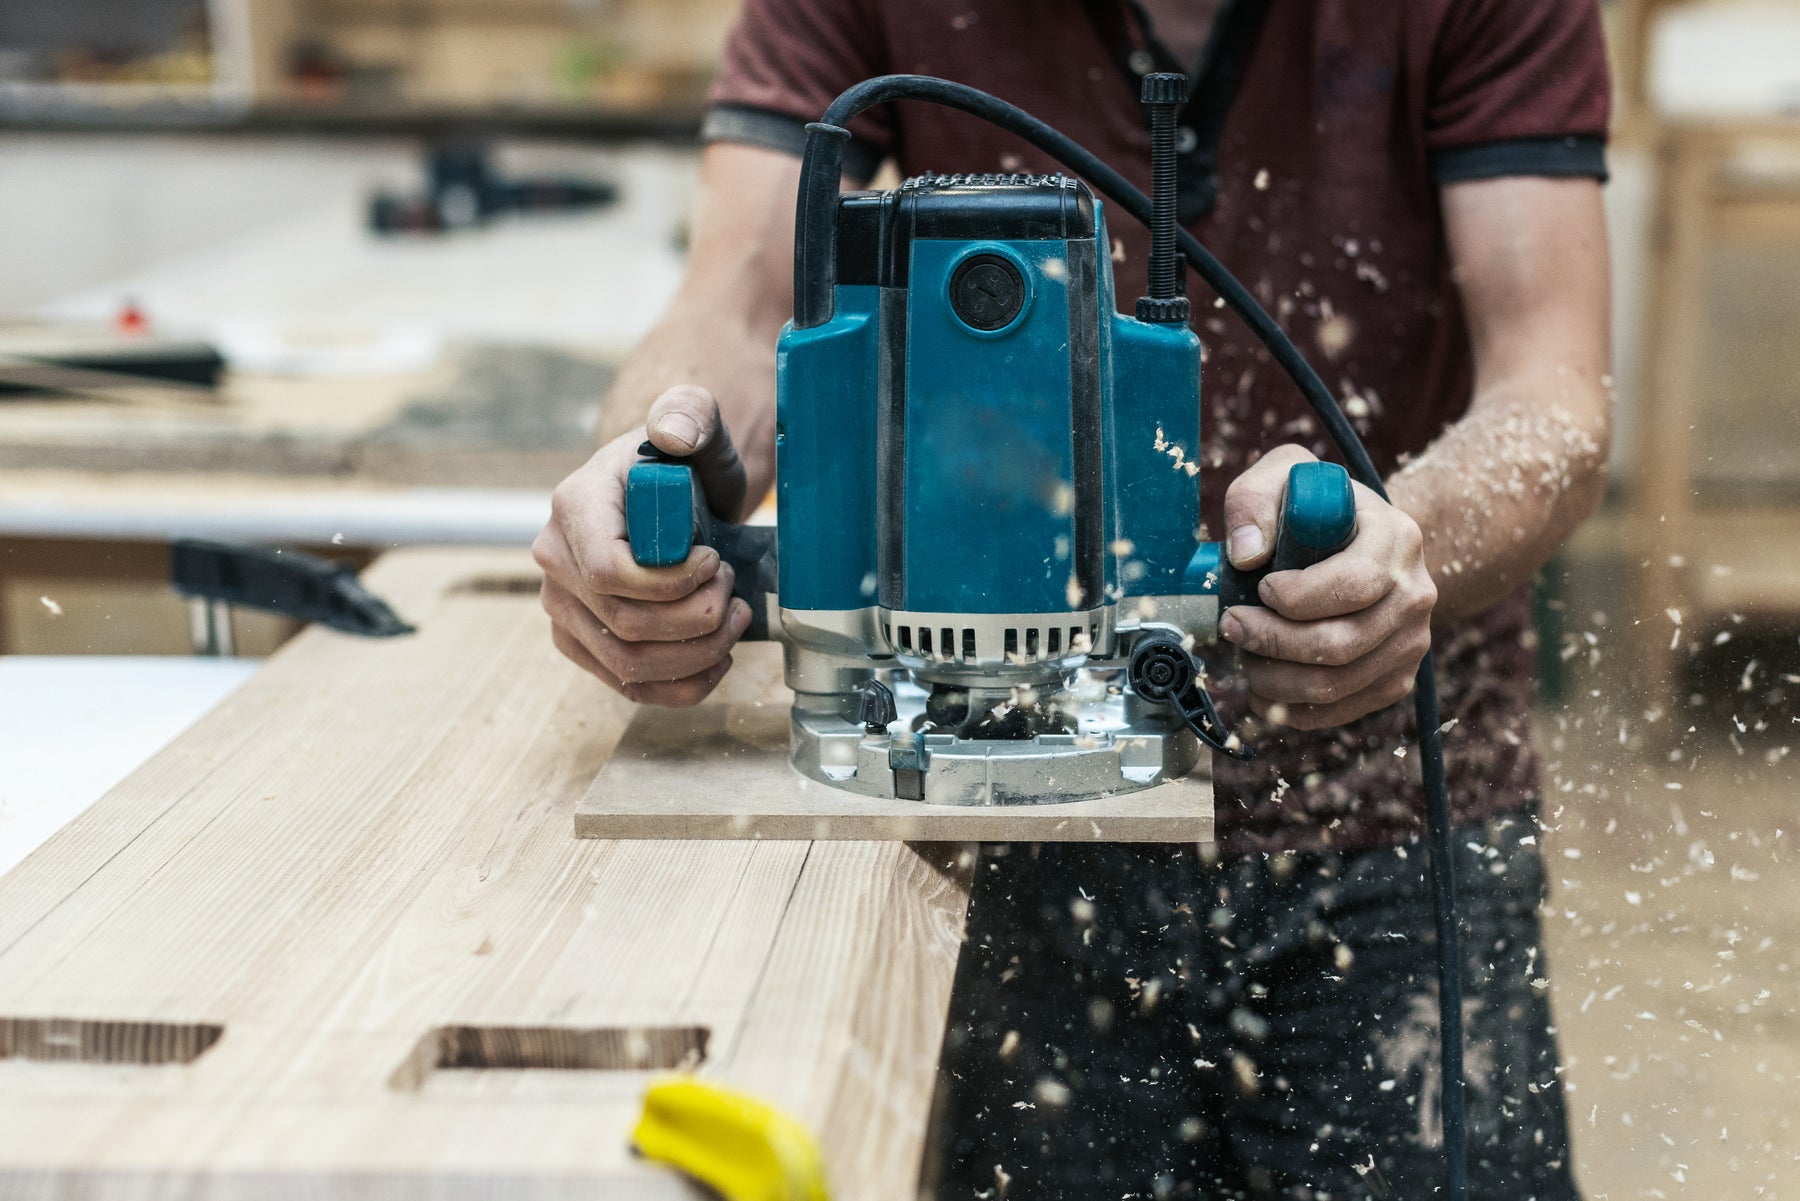 We Can Help You Turn Your Woodworking Hobby into a Business